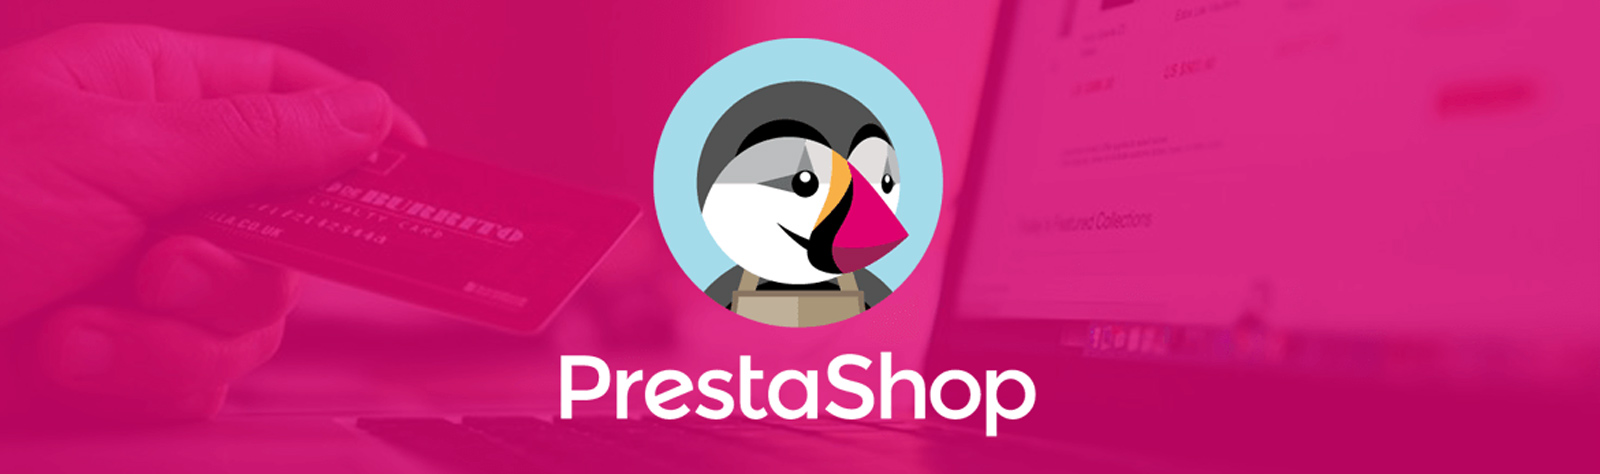 PrestaShop acquired by the Italian group MBE Worldwide.